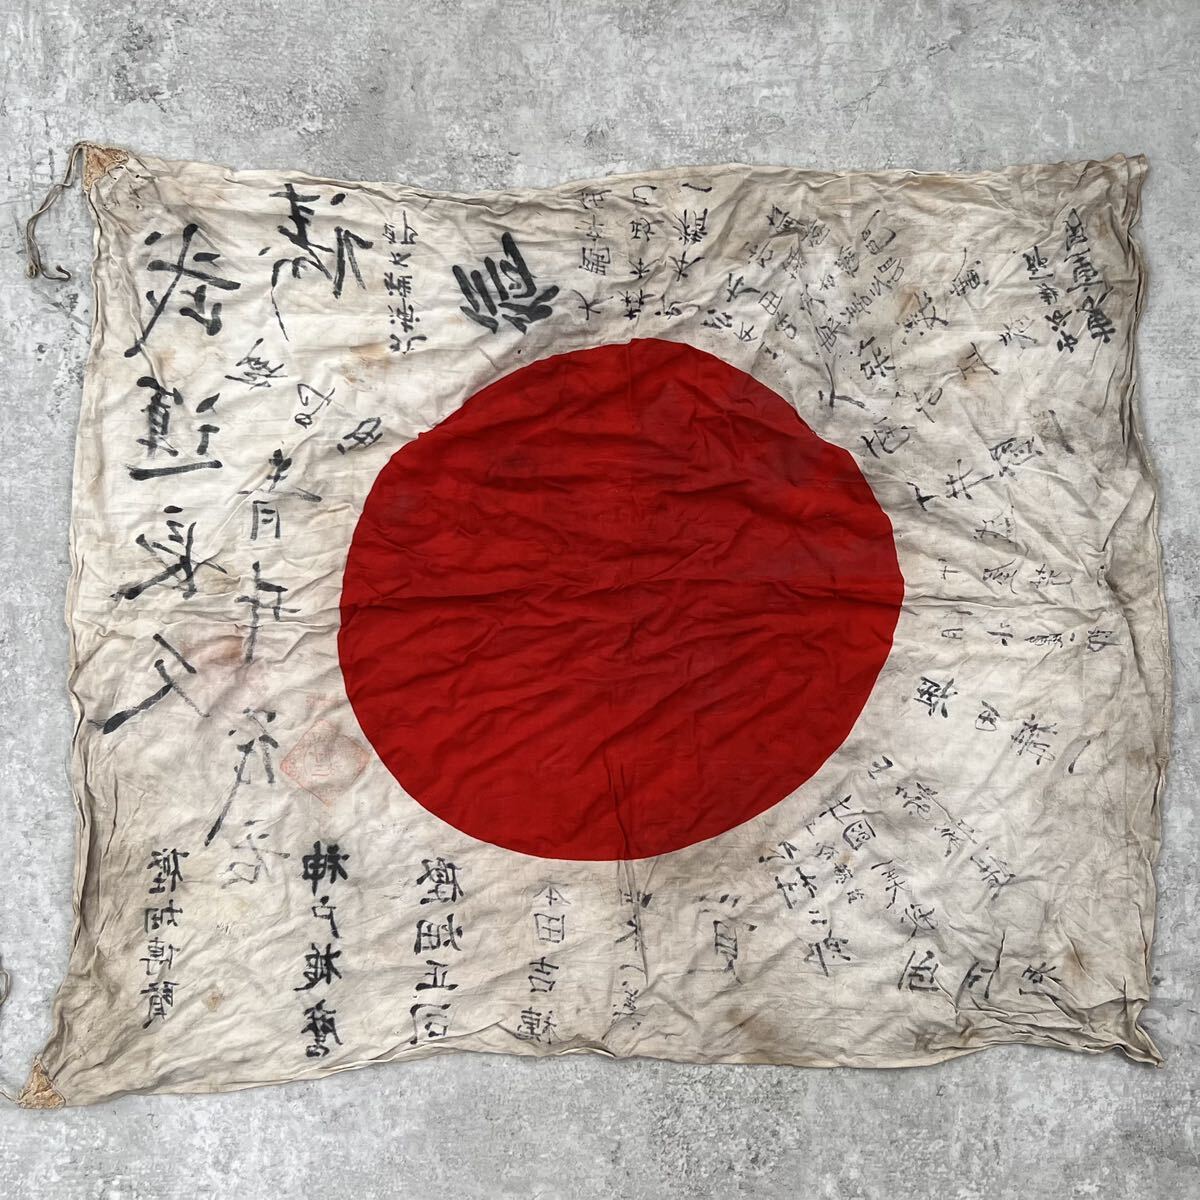  that time thing .. flag old Japan army outline of the sun .. length . collection of autographs / flag flag day chapter flag Japan army large Japan . country national flag Special .. main .. change war army person 